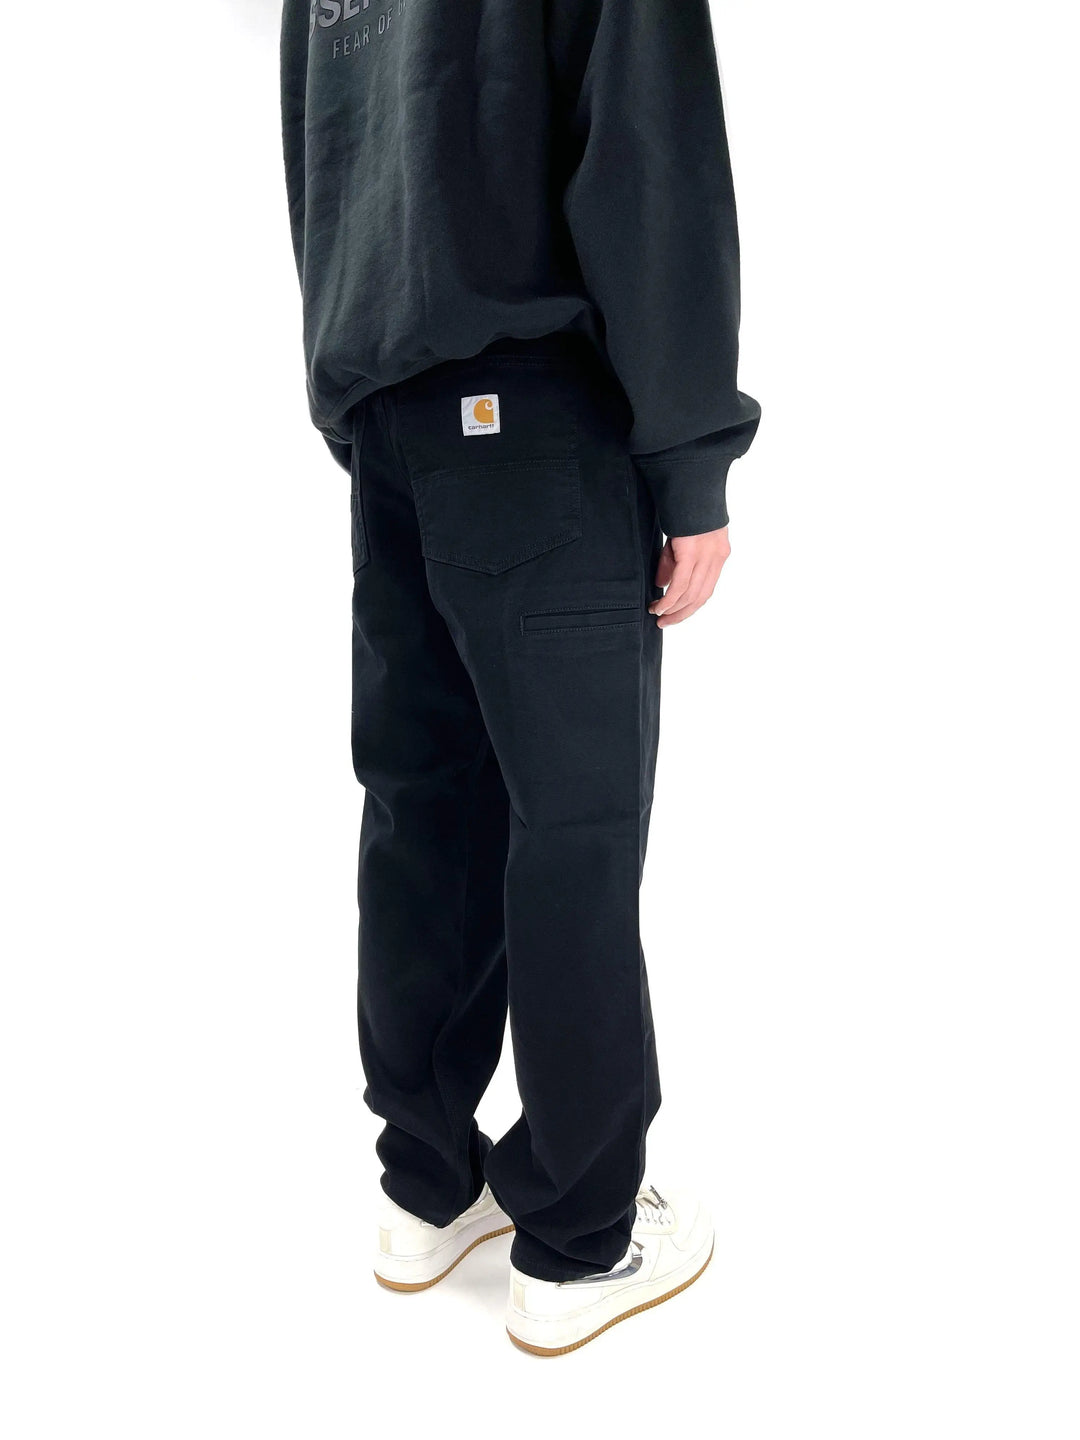 Carhartt Five Pocket Relaxed Fit Pant Black Prior